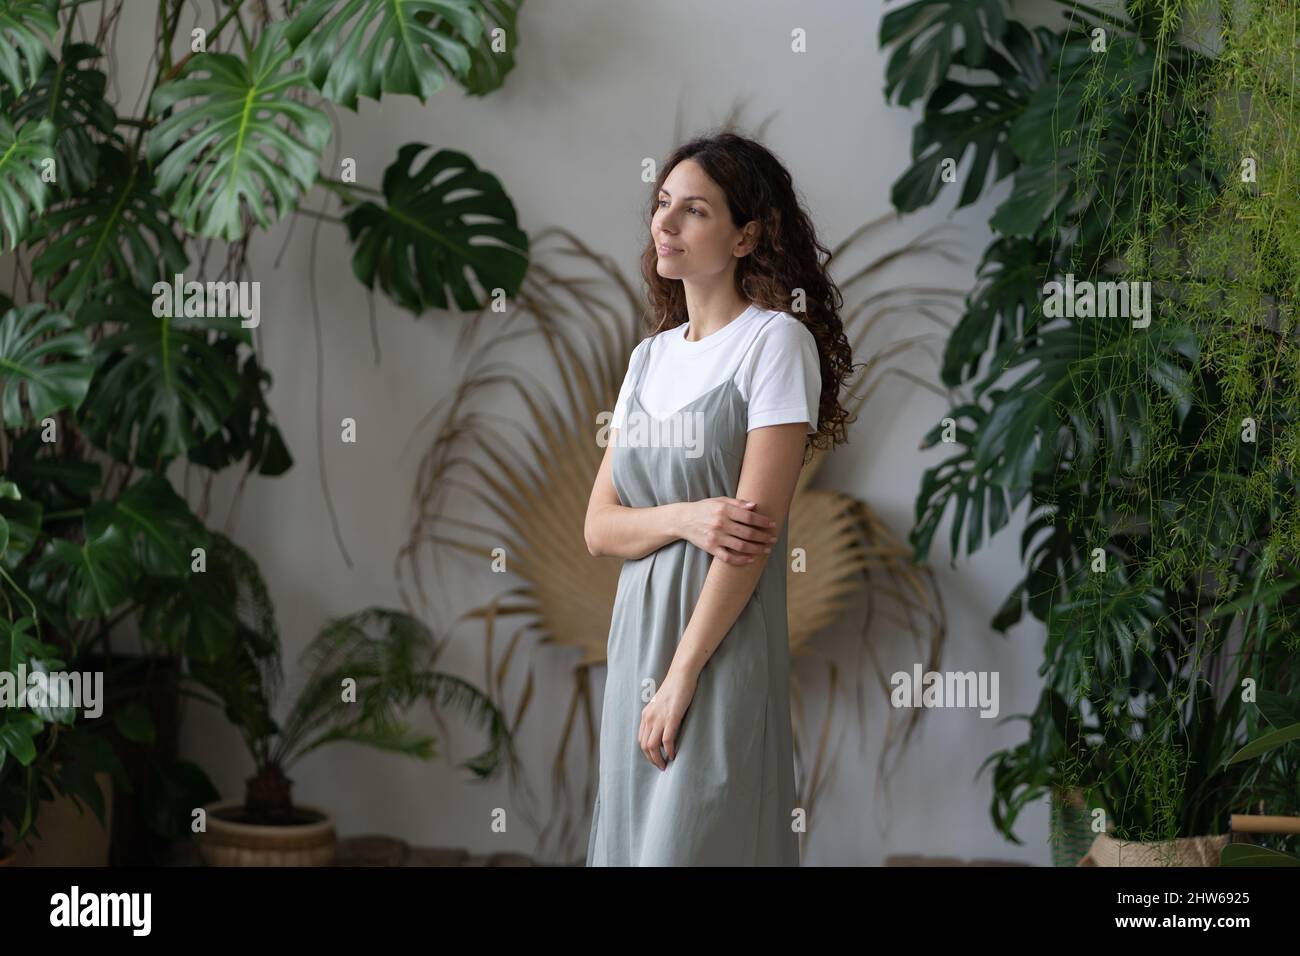 Young creative florist lady enjoy caring for houseplants in beautiful indoor garden with monstera Stock Photo